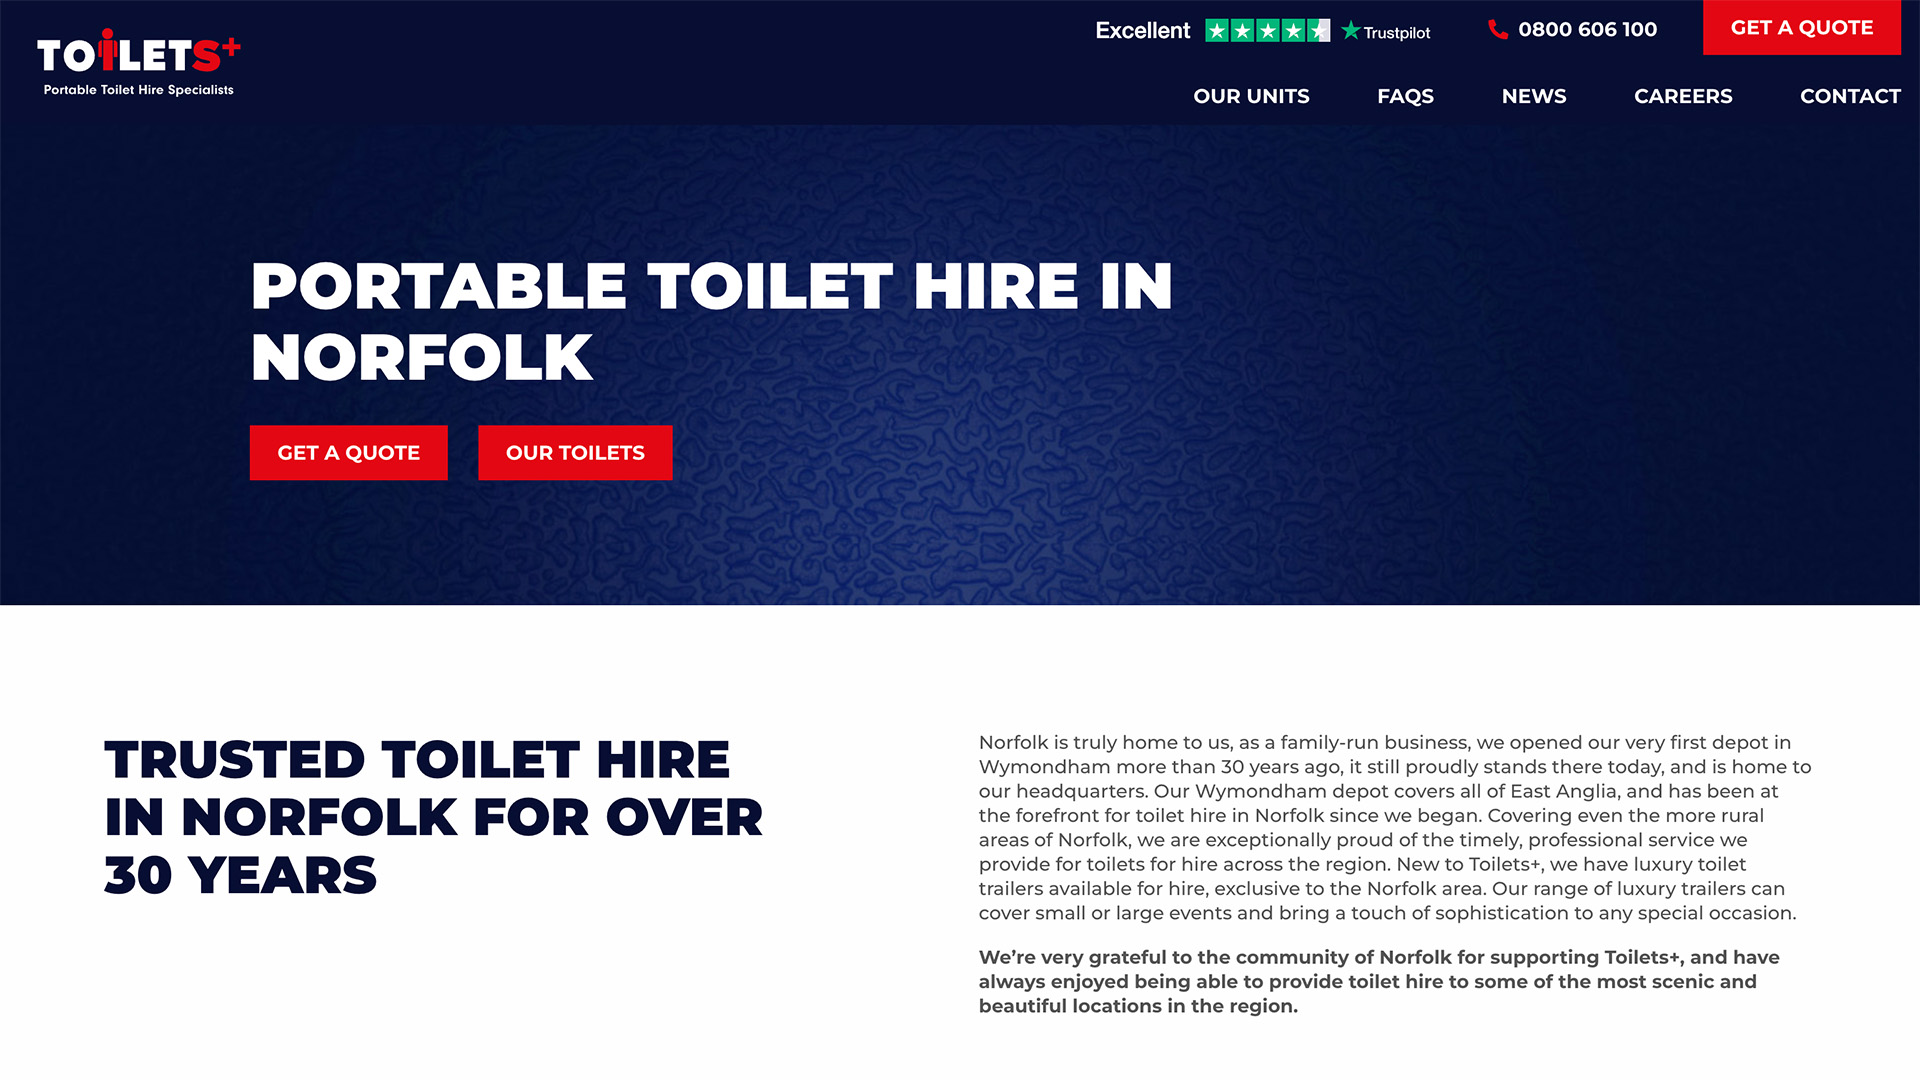 Toilets+ website page